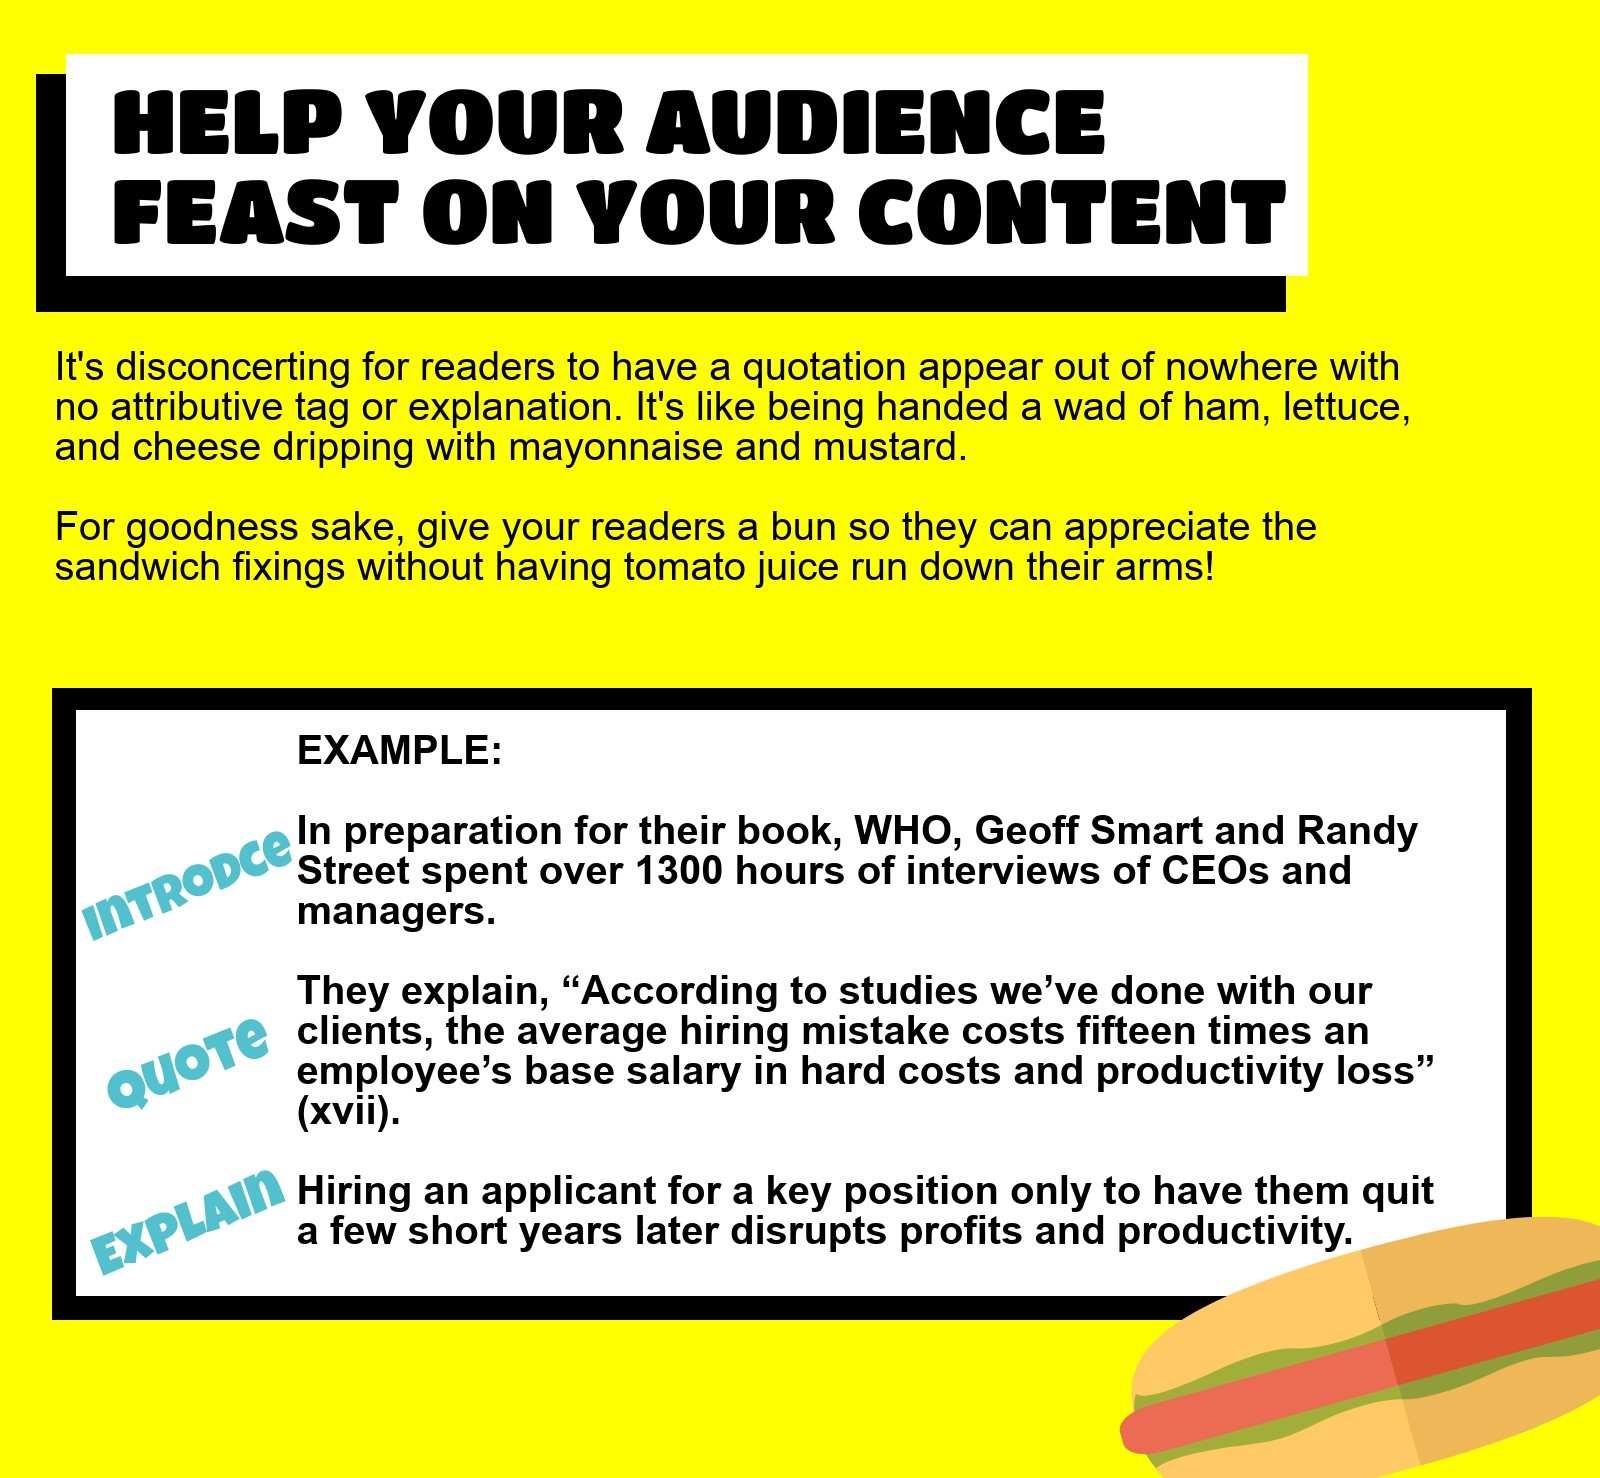 A graphic reiterates: "Help your audience feast on your content. It's disconcerting for readers to have a quotation appear out of nowhere with no attributive tag or explanation. It's like being handed a wad of ham, lettuce, and cheese dripping with mayonnaise and mustard. For goodness sake, give your readers a bun so they can appreciate the sandwich fixings without having tomato juice run down their arms! Example: INTRODUCE In preparation for their book, Who, Geoff Smart and Randy Street spent over 1300 hours of interviews of CEOs and managers. QUOTE They explain, 'According to studies we've done with our clients, the average hiring mistake costs fifteen times an employee's base salary in hard costs and productivity loss.' EXPLAIN Hiring an applicant for a key position only to have them quit a few short years later disrupts profits and productivity."